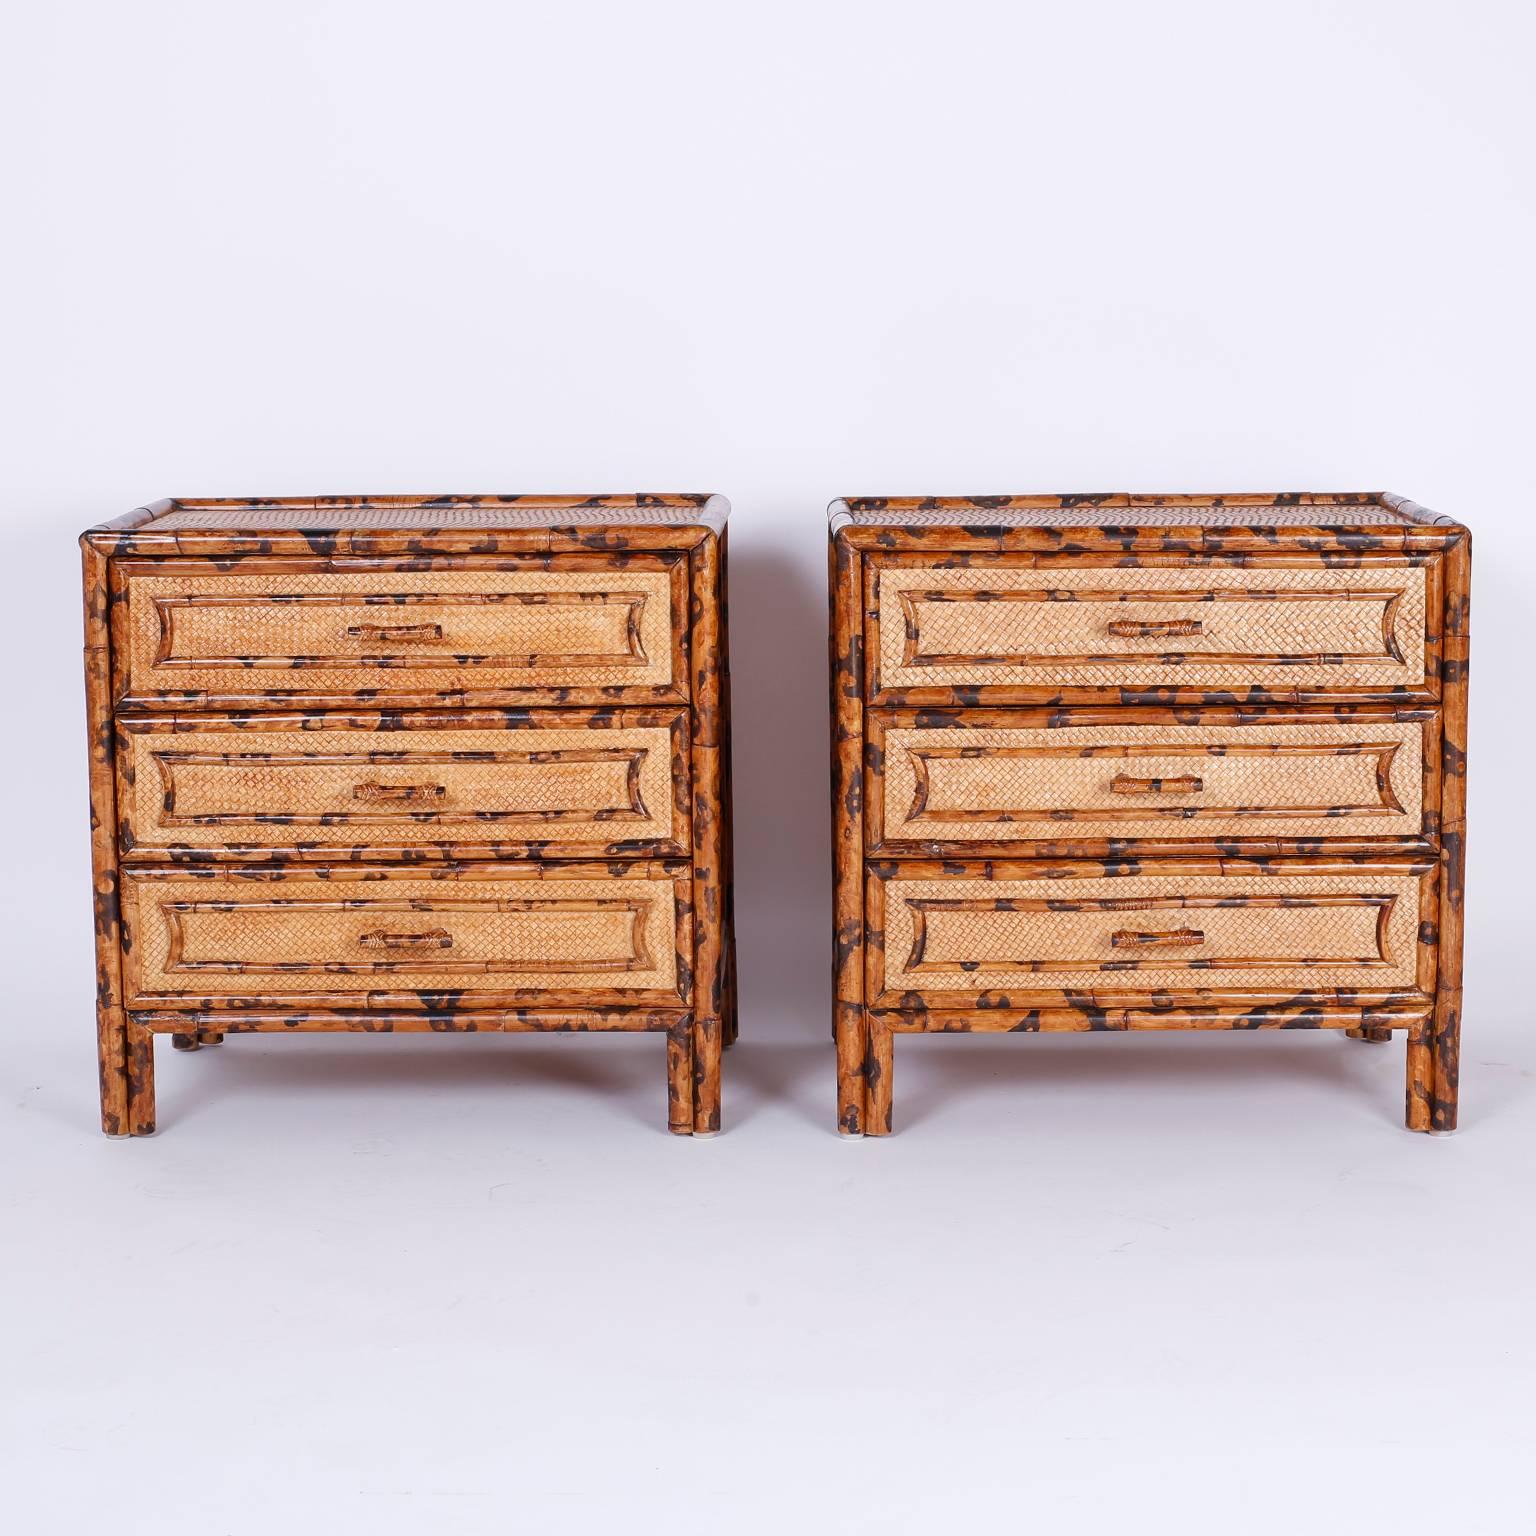 Pair of British Colonial or West Indies style three drawer nightstands, or bedside tables with soothing organic colors and textures. Having a faux burnt bamboo trim and all-over a grass cloth background.